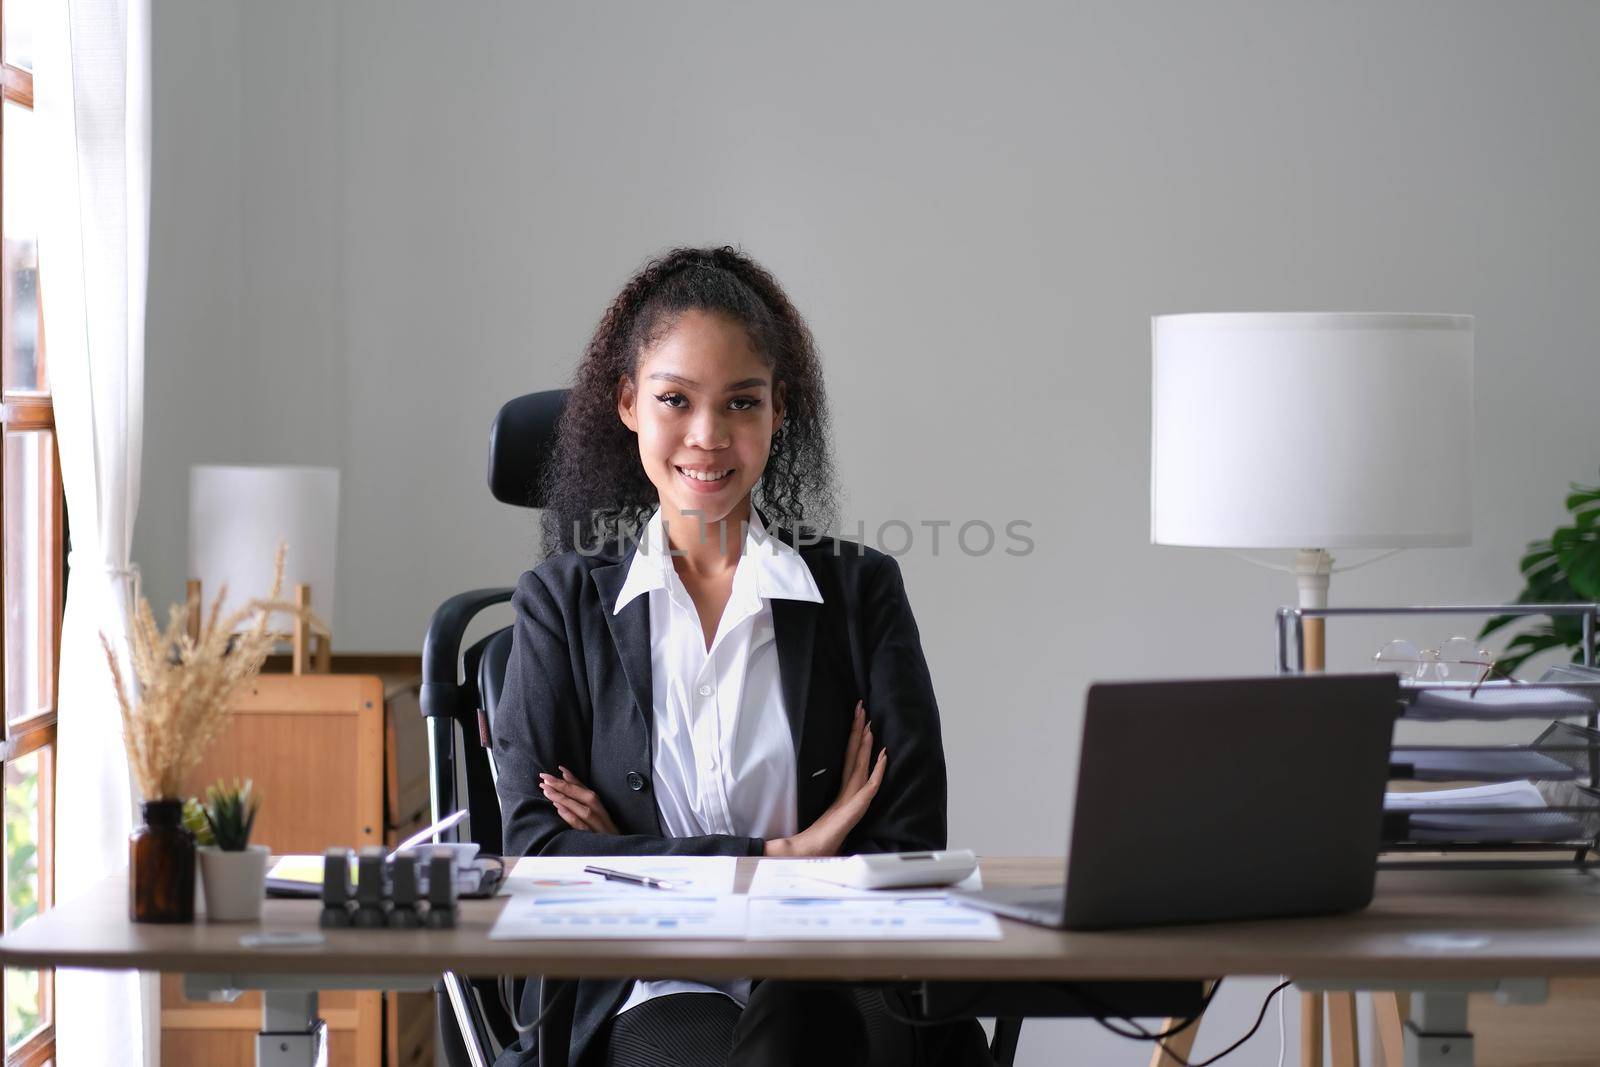 Smiling beautiful female professional manager standing with arms crossed looking at camera, happy confident business woman corporate leader boss ceo posing in office, headshot close up portrait.